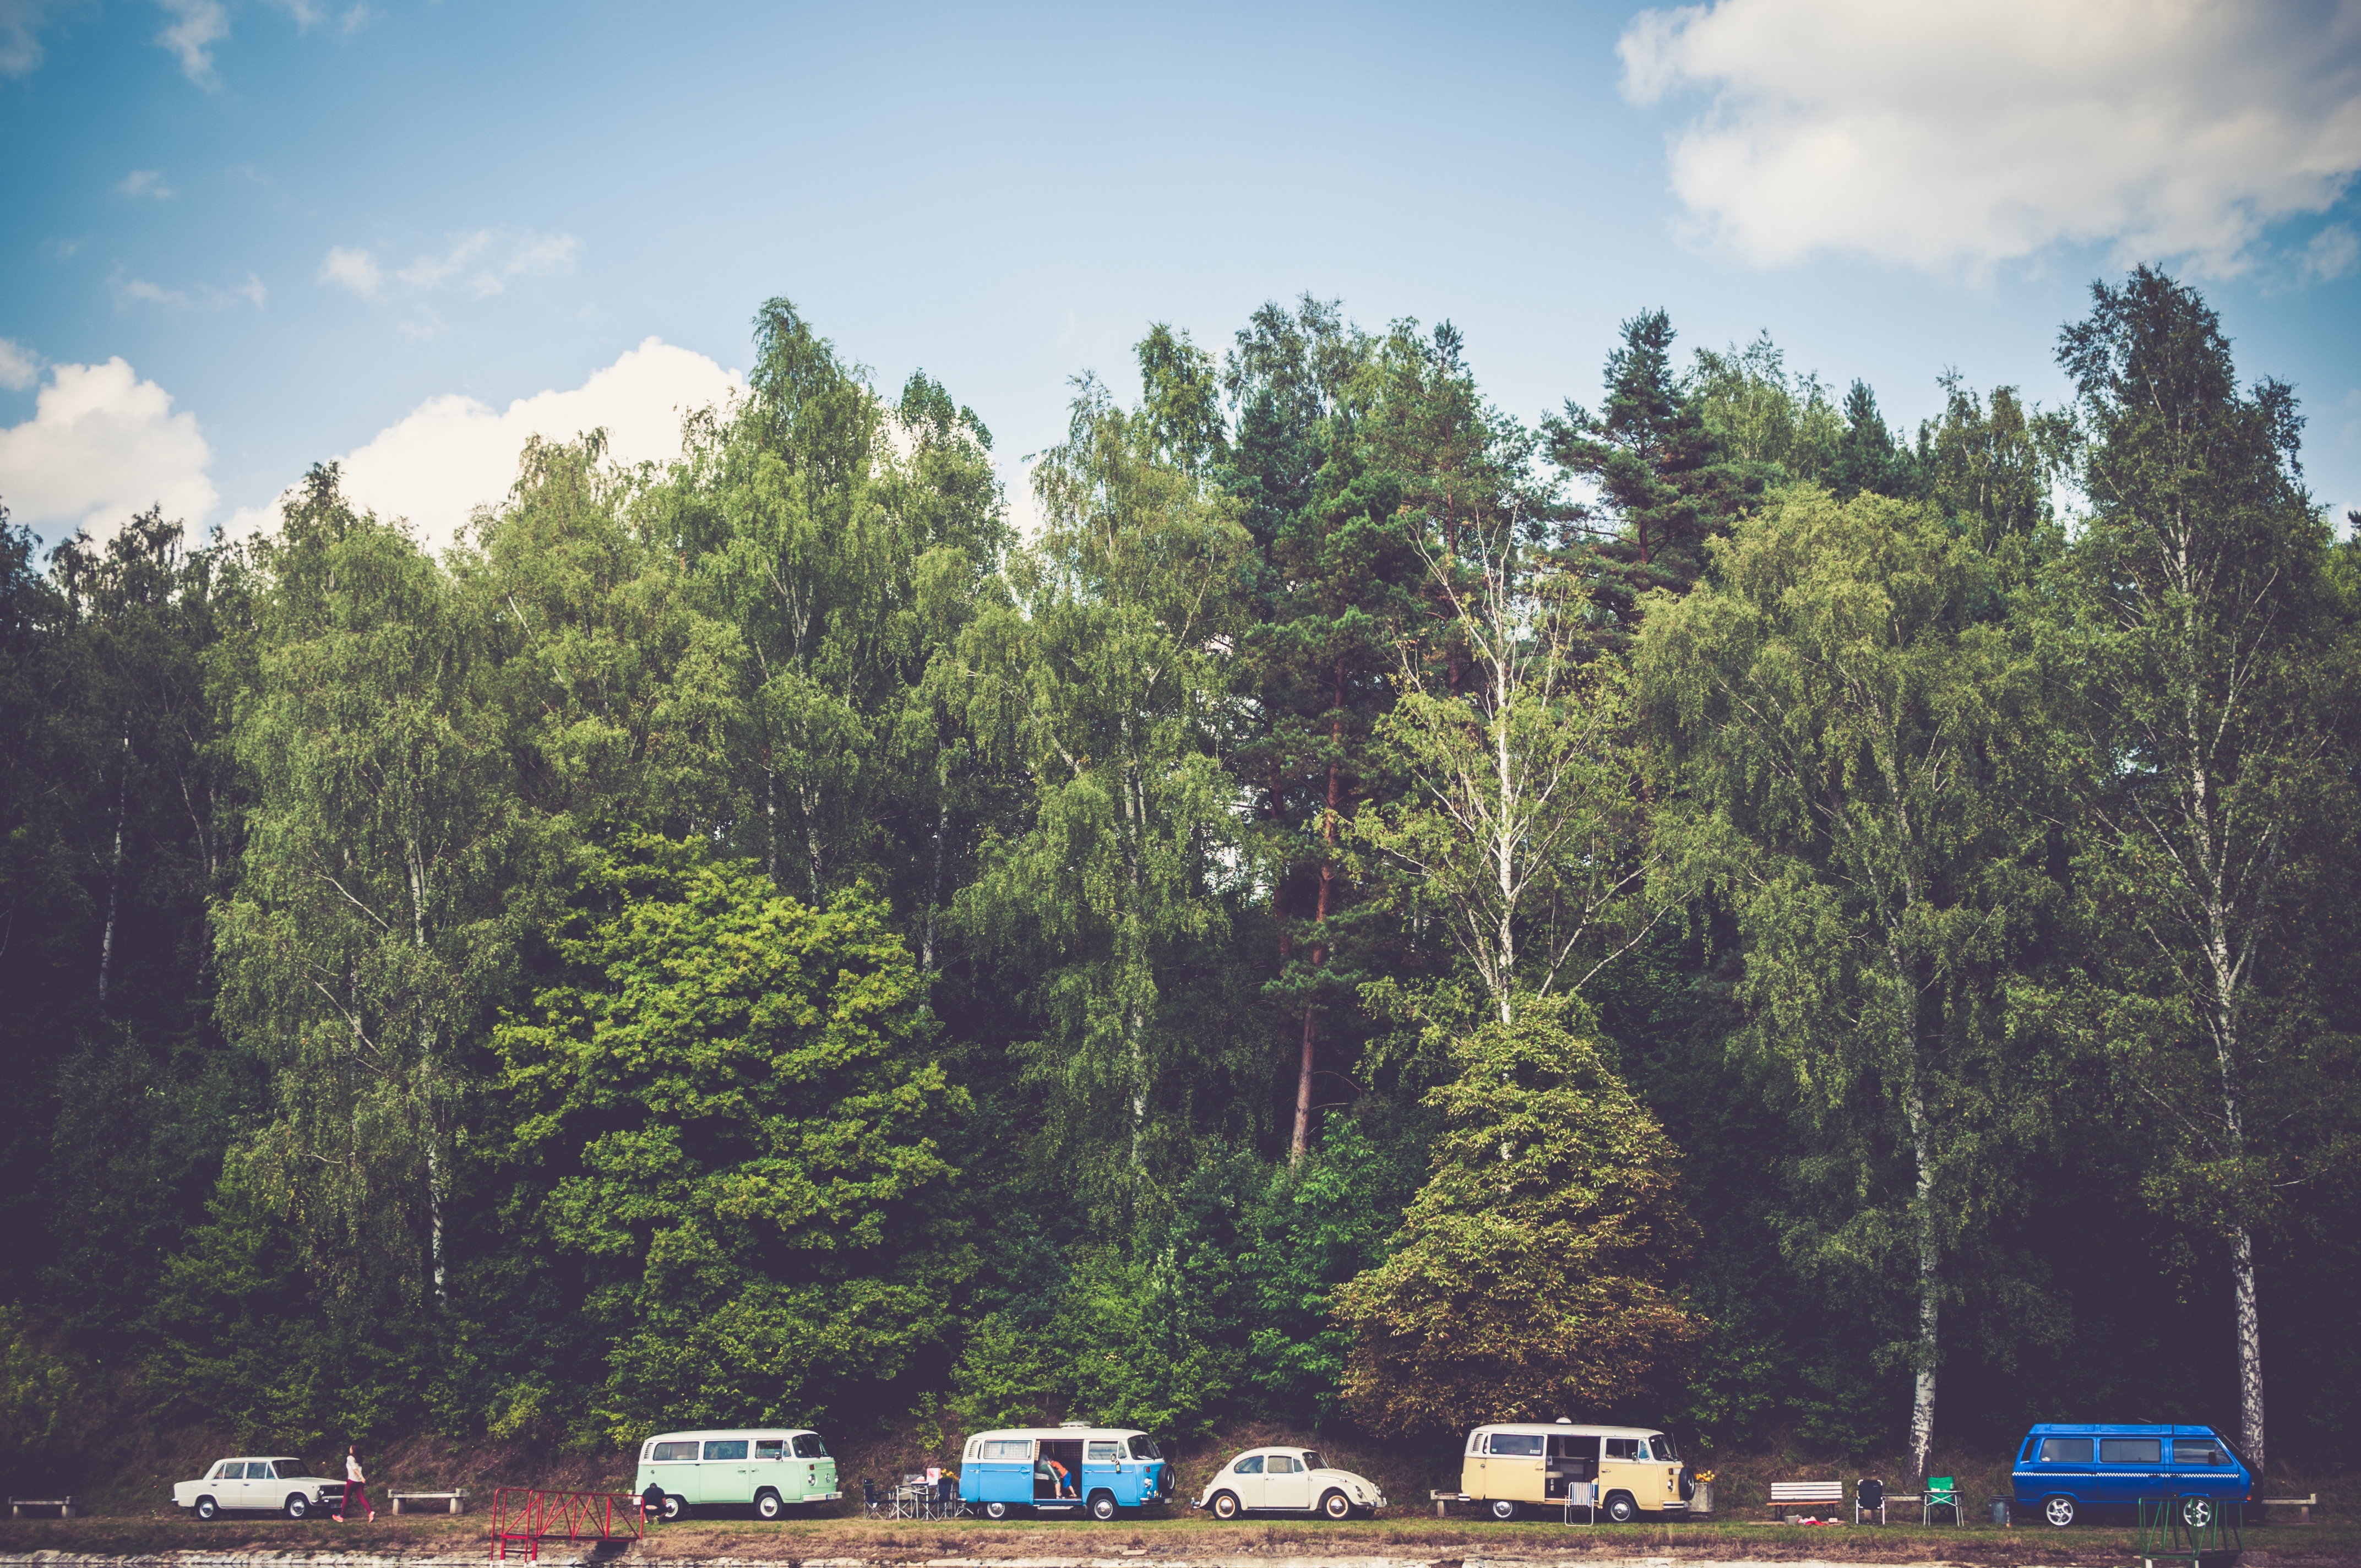 camping, nature, trees, forest, campsite, vans